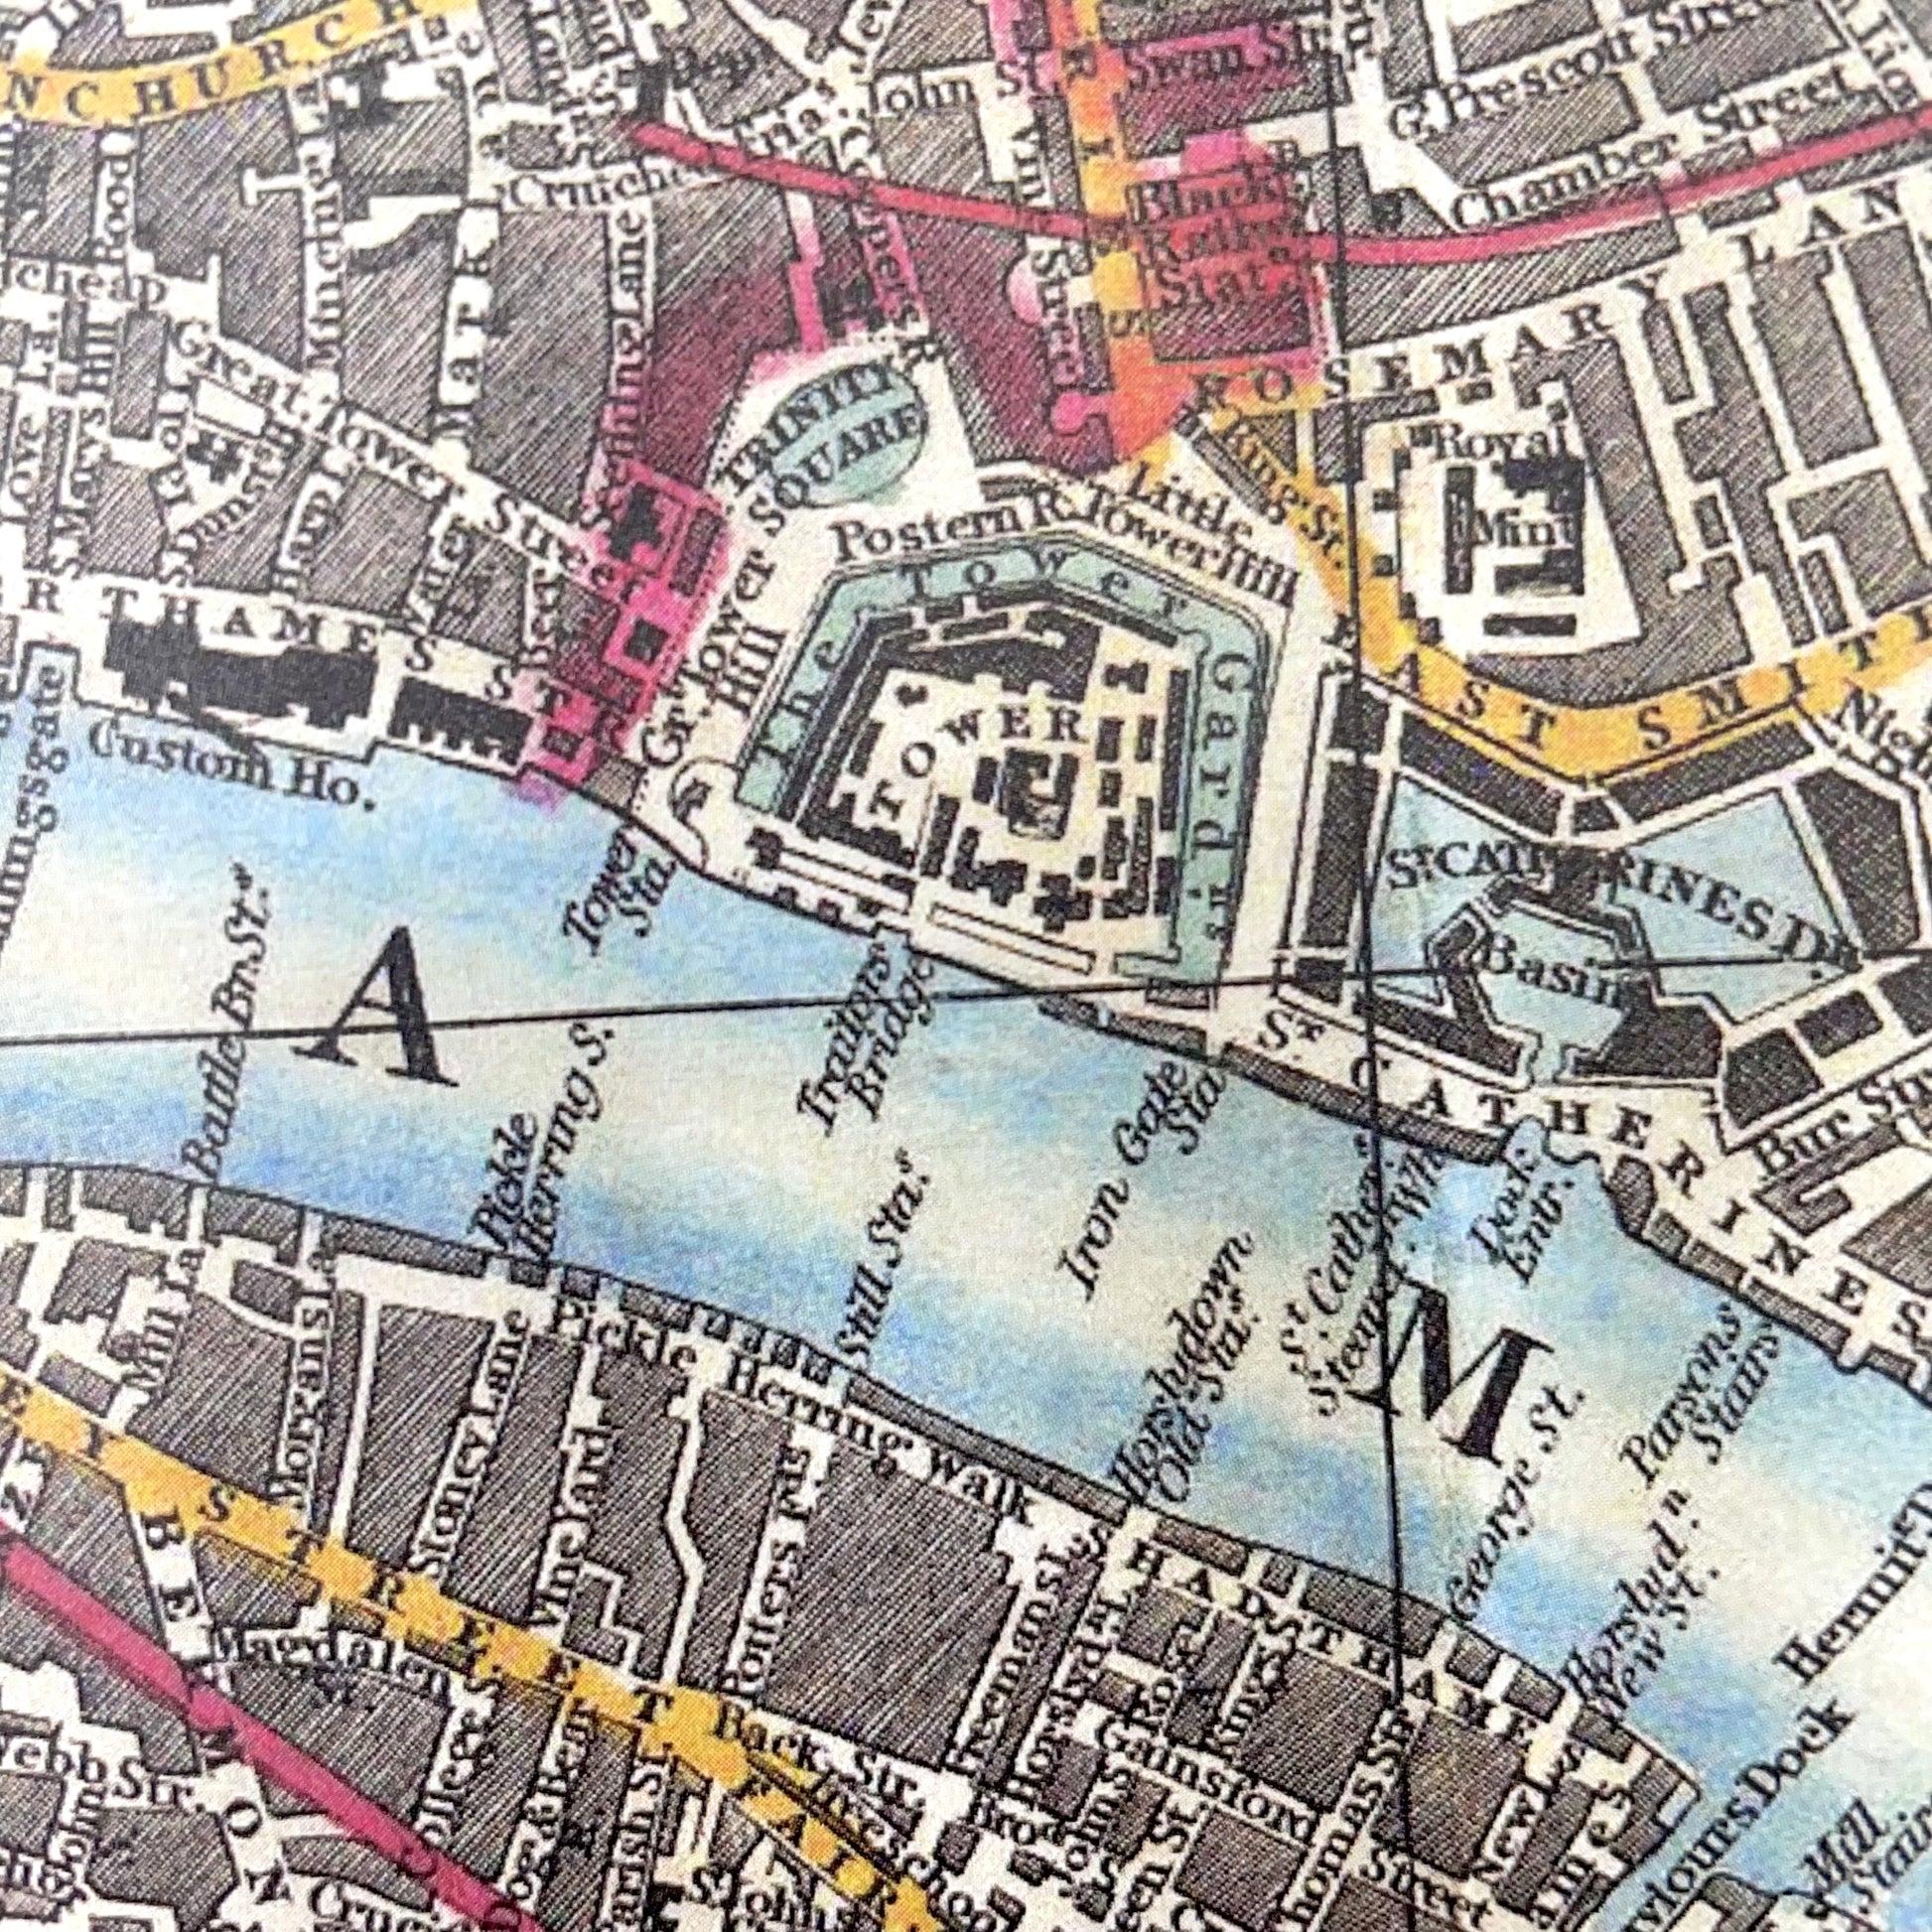 Wrapping paper with a vintage map of London (1848) by George Federick Cruchley. The map shows the proposed developments for London at this time and extends from Hyde Park in the west to the Docklands in the East, detail of The Tower of London